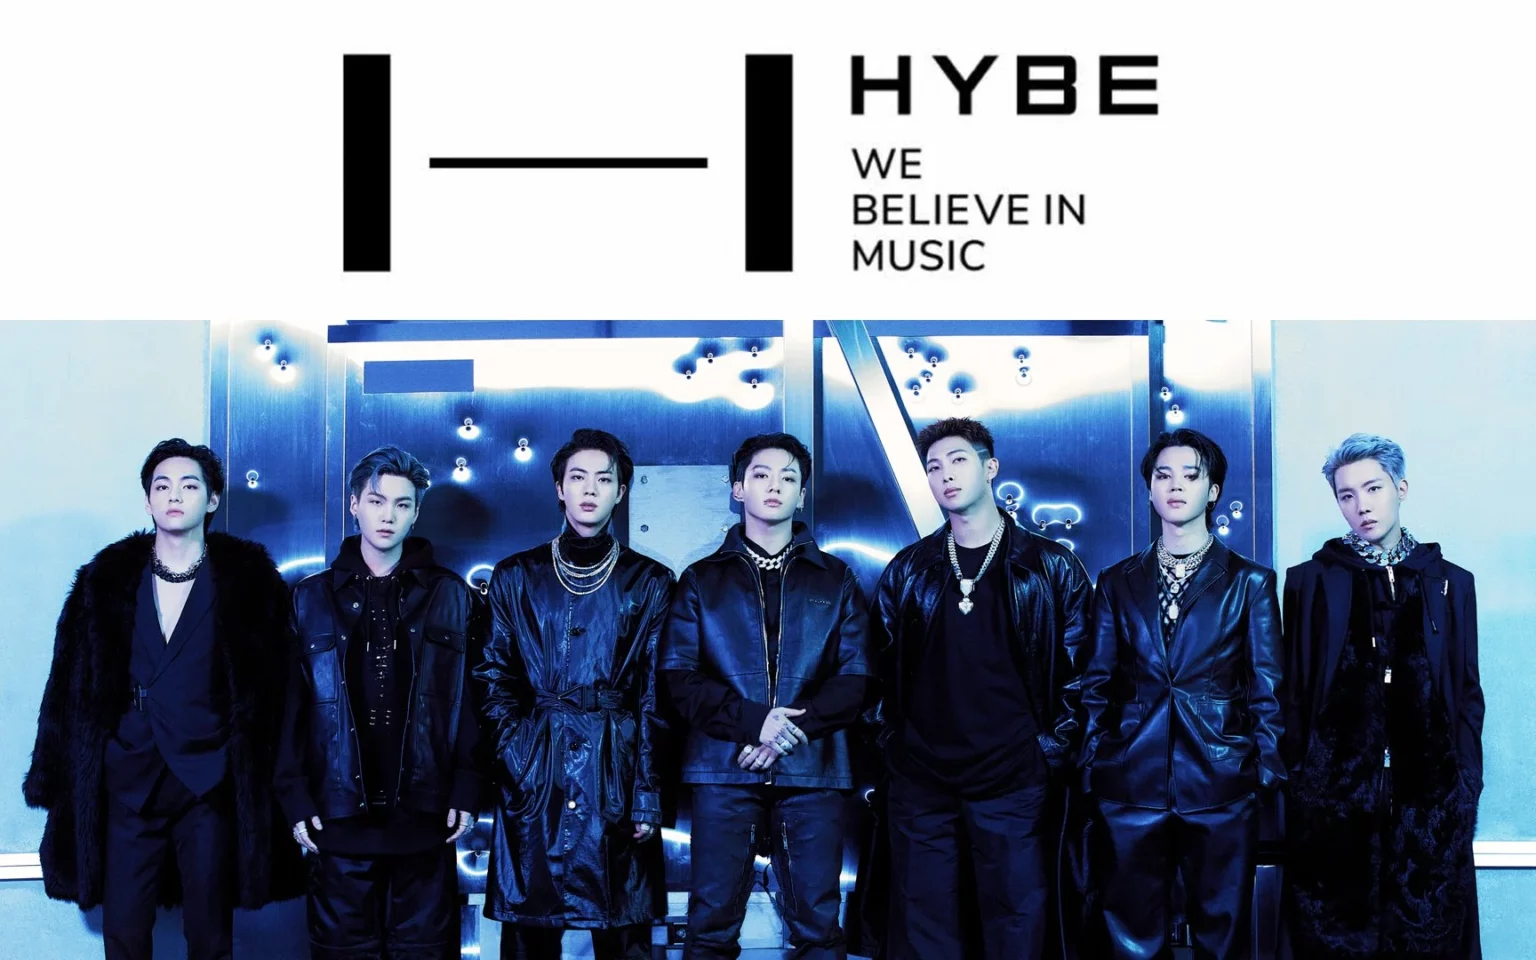 bts-agency-hybe-employees-accused-of-insider-trading